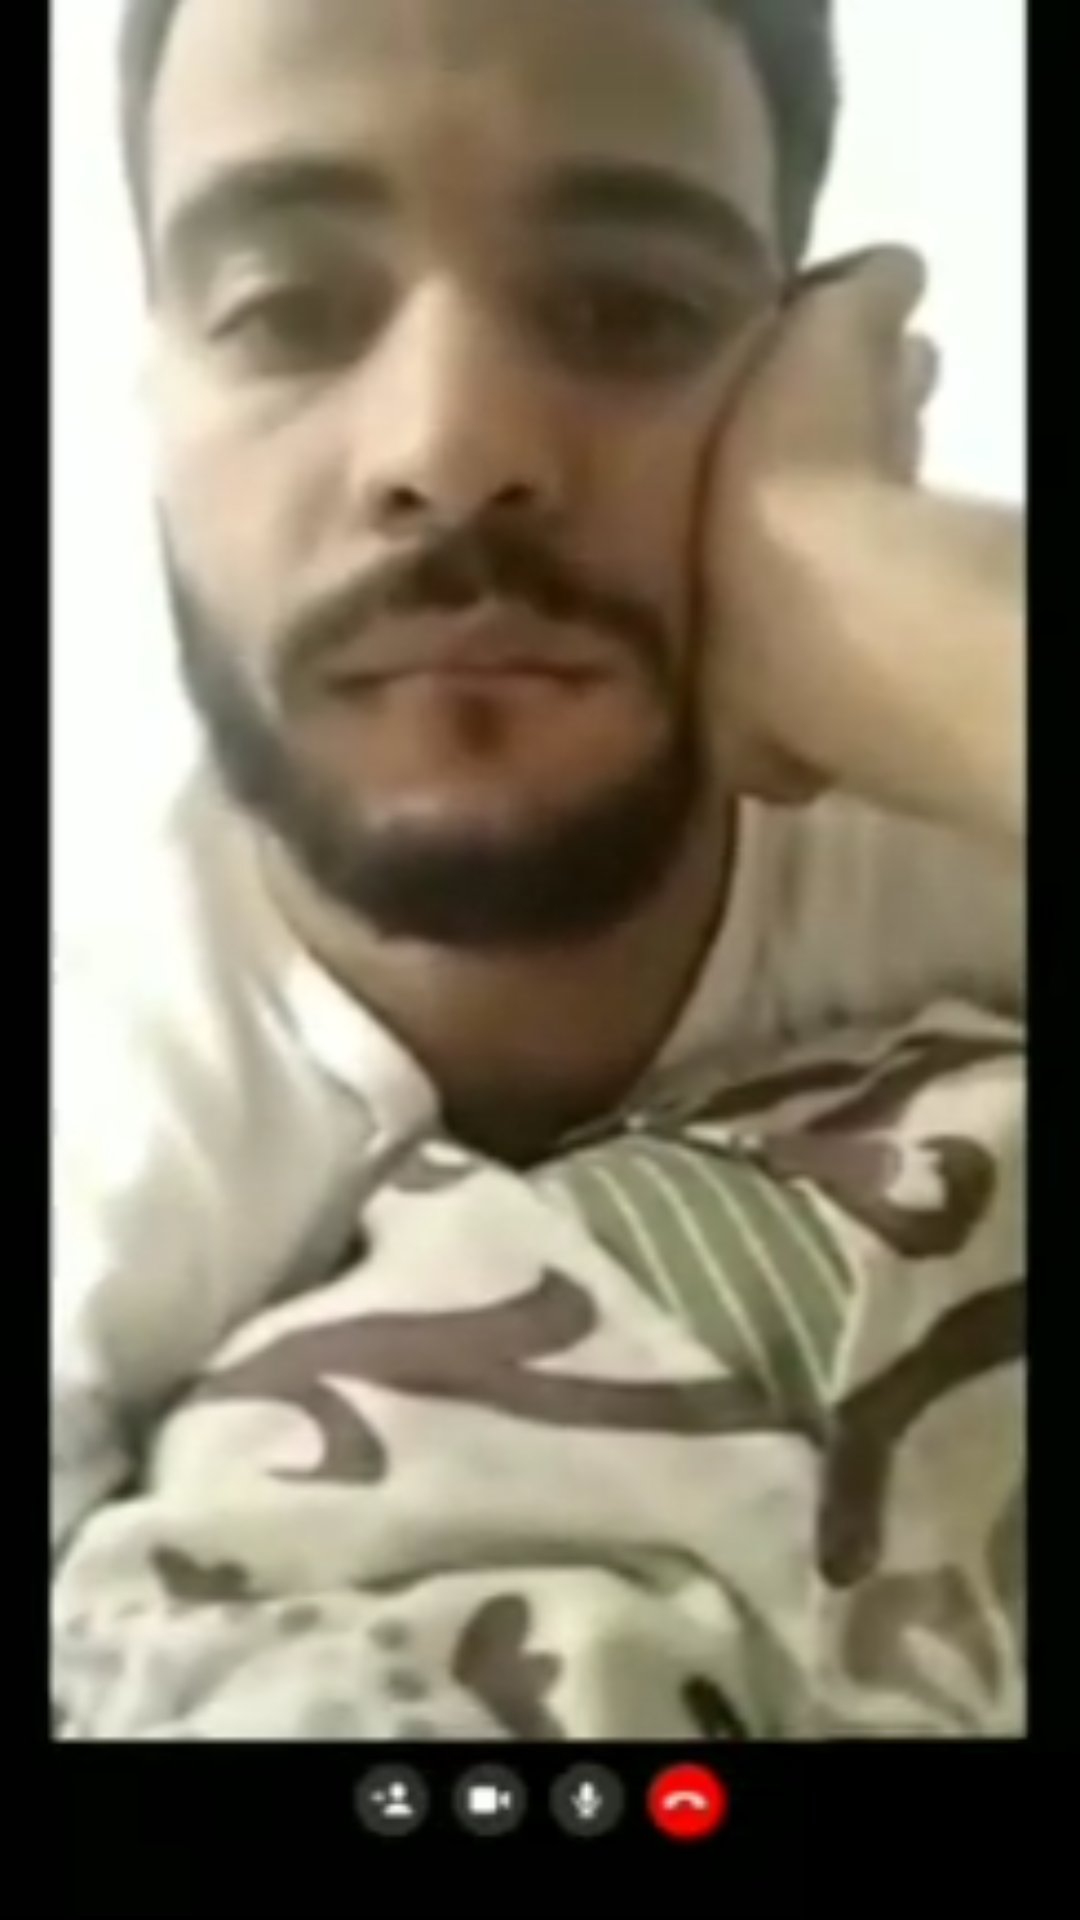 Turkish fucks bed for me in video call